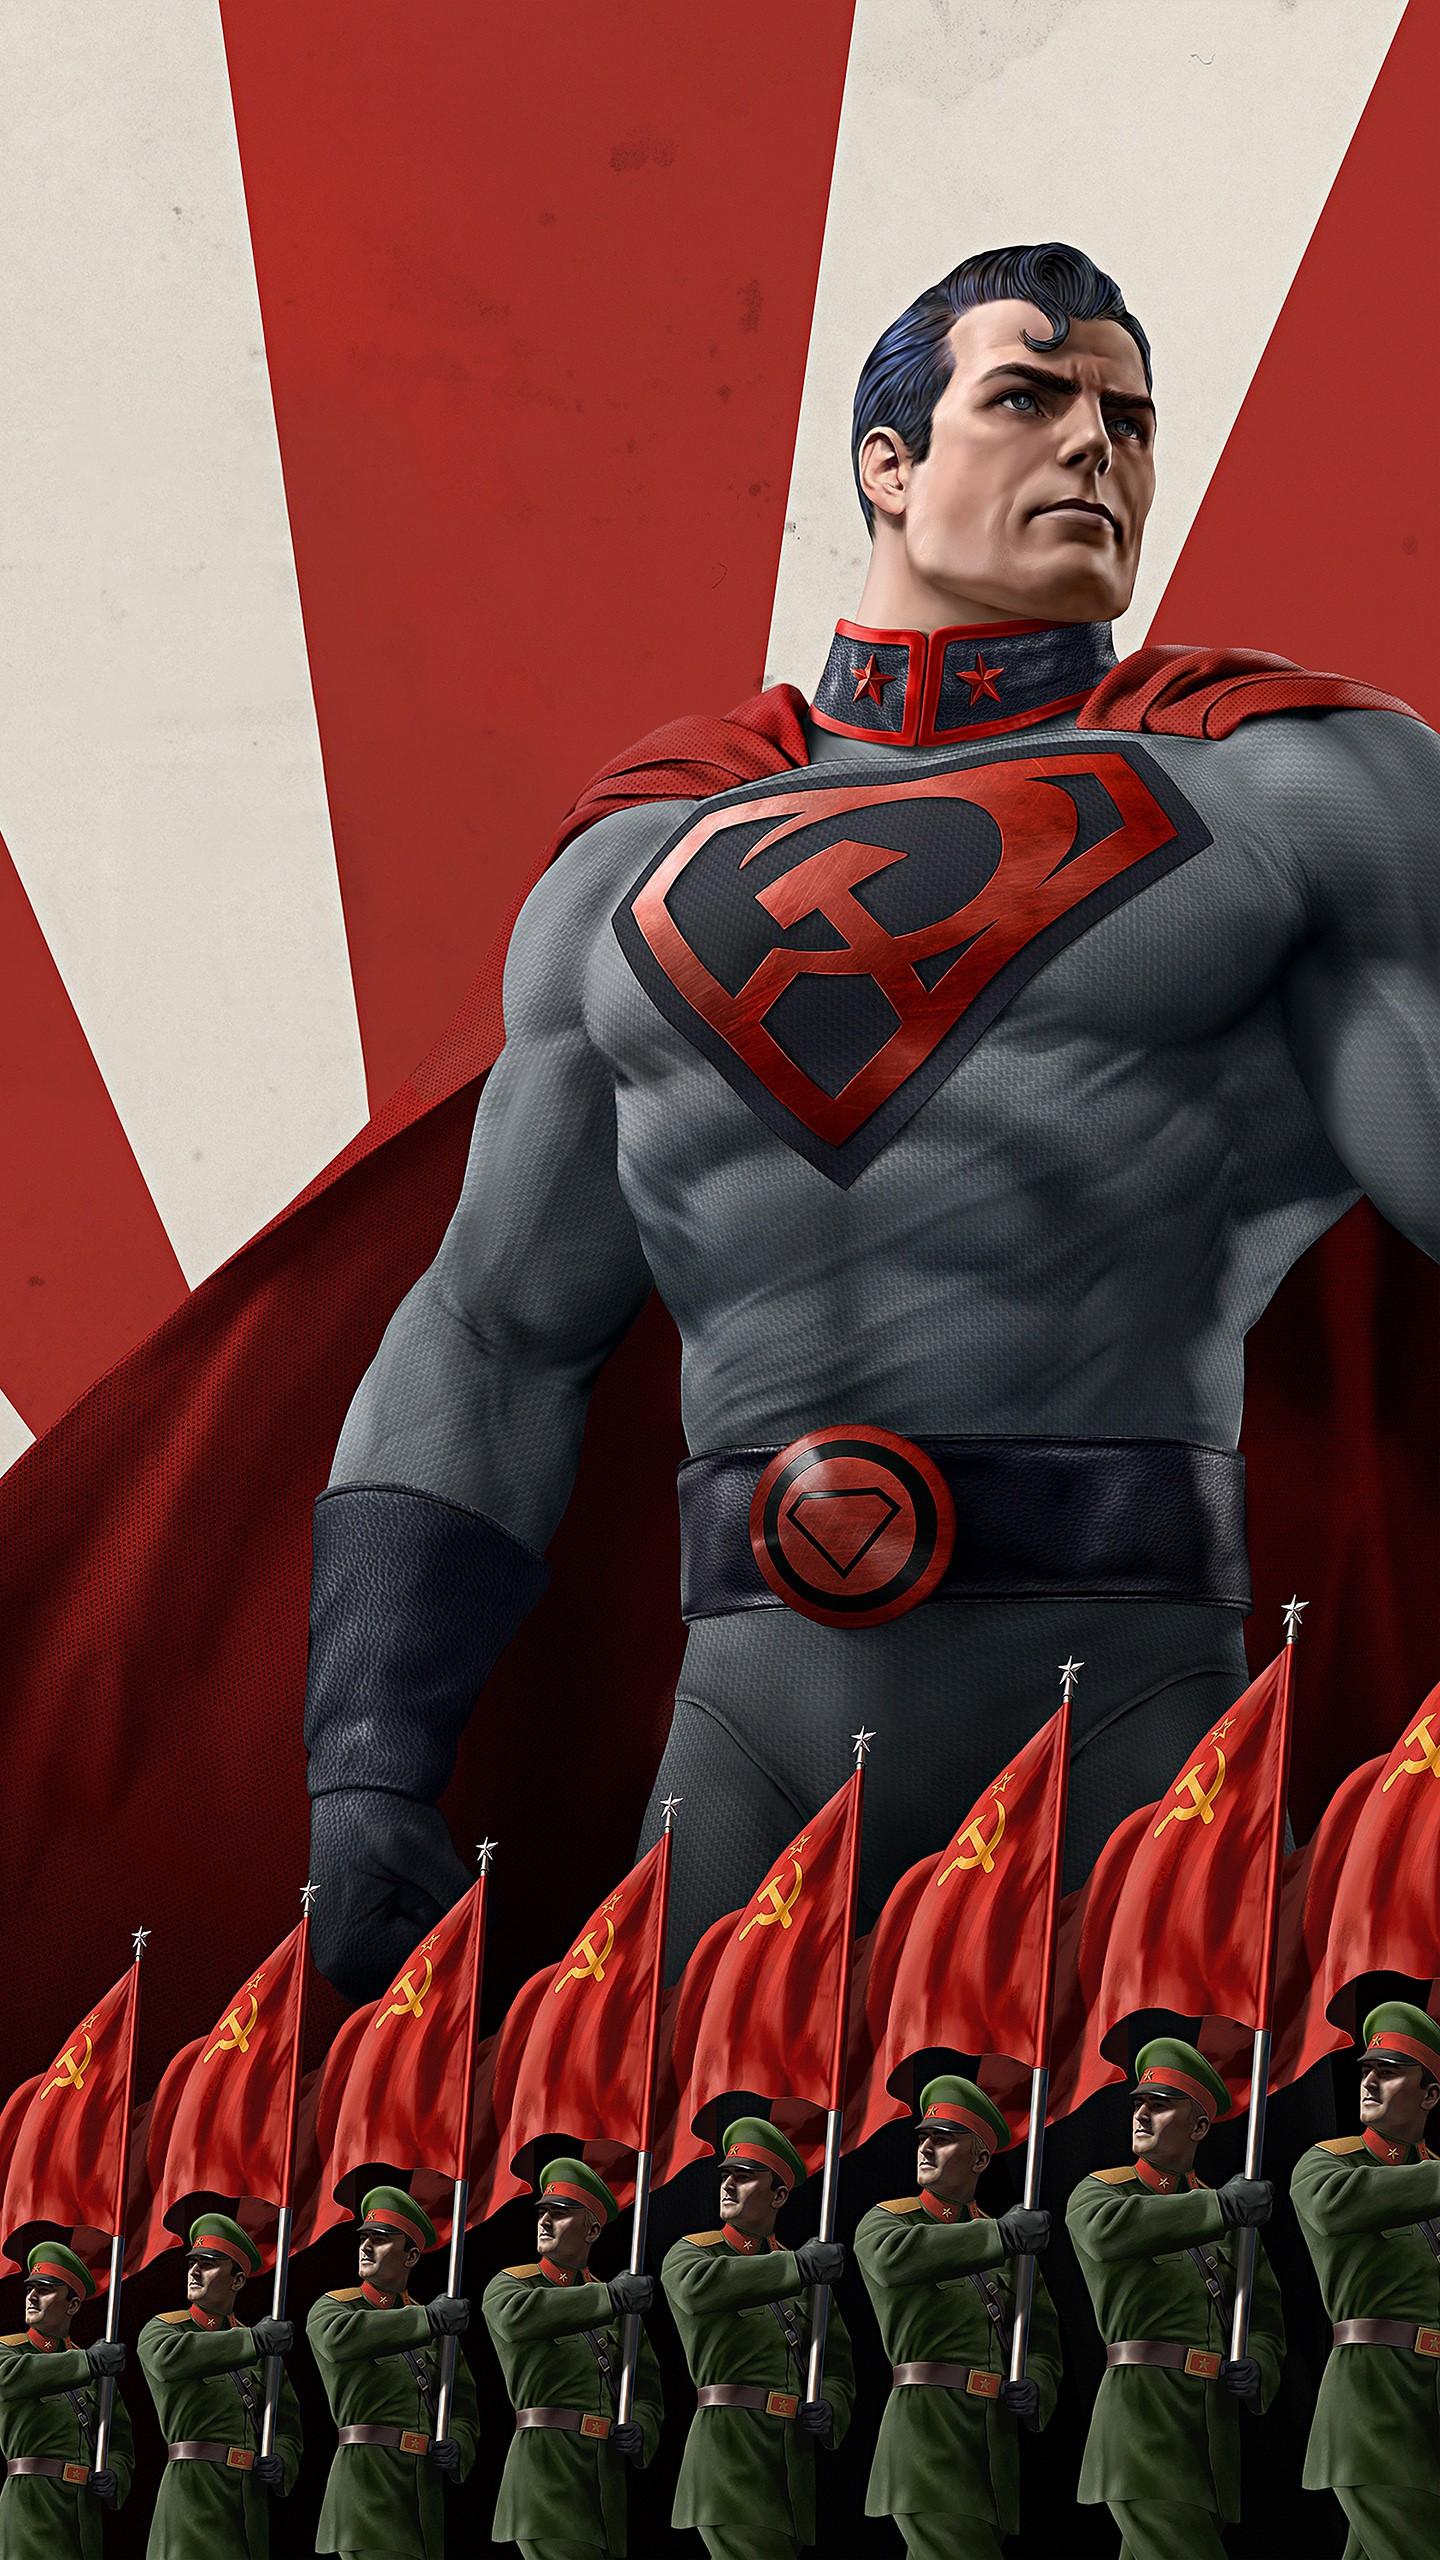 DOWNLOAD SUPERMAN RED SON 2020 5K WALLPAPERS DOWNLOAD